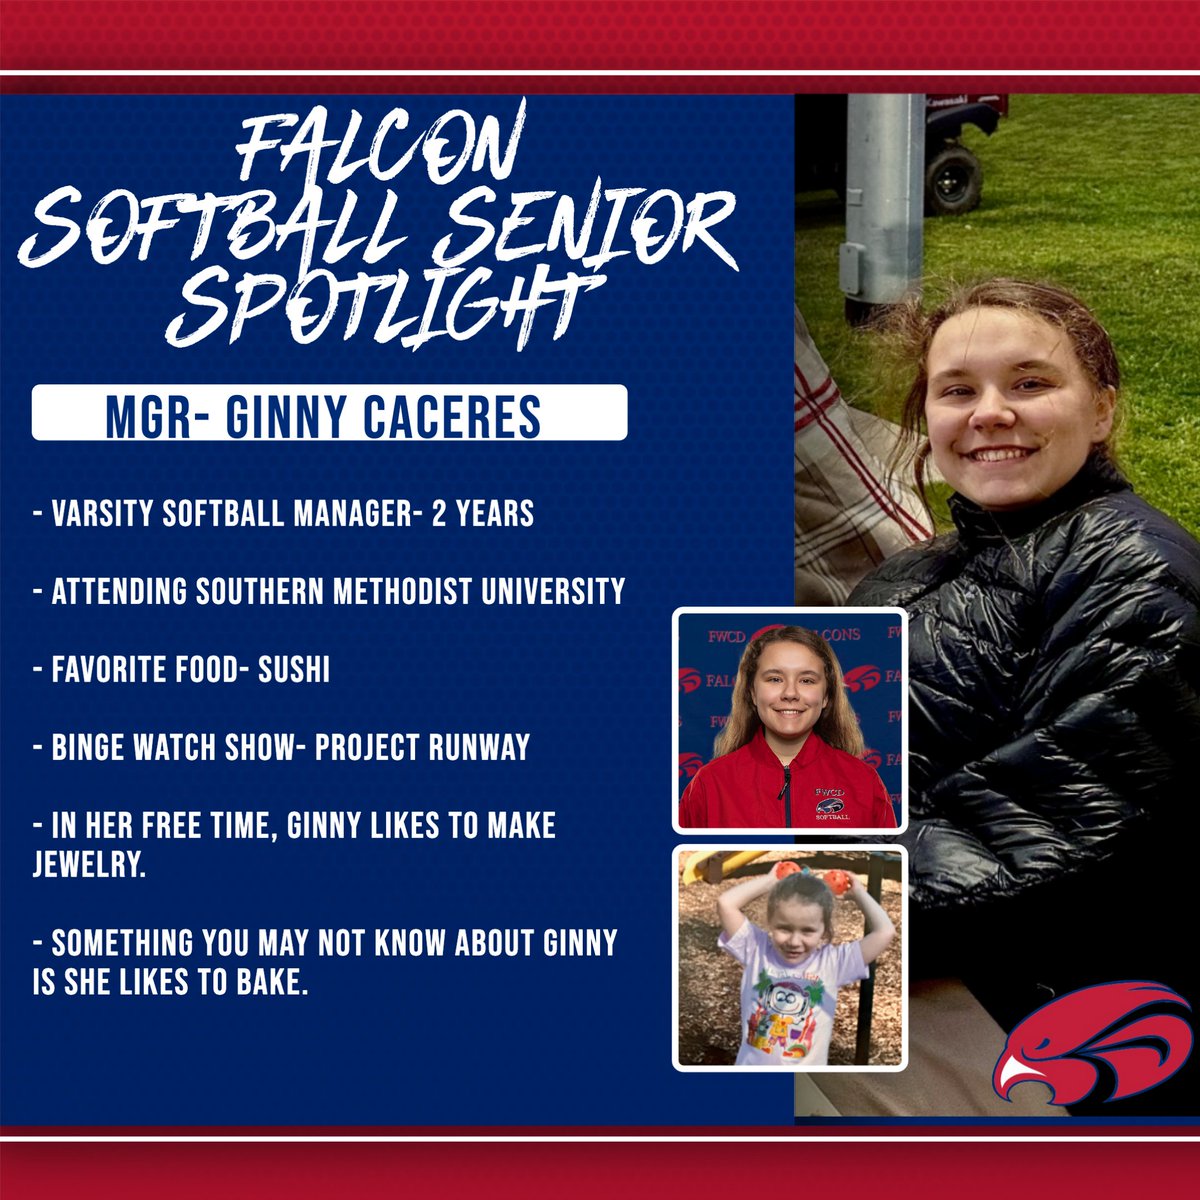 We wrap up our Senior Spotlights with our favorite senior manager, DJ Ginny Caceres!!! #FWCD #LEAD #FlyHigher